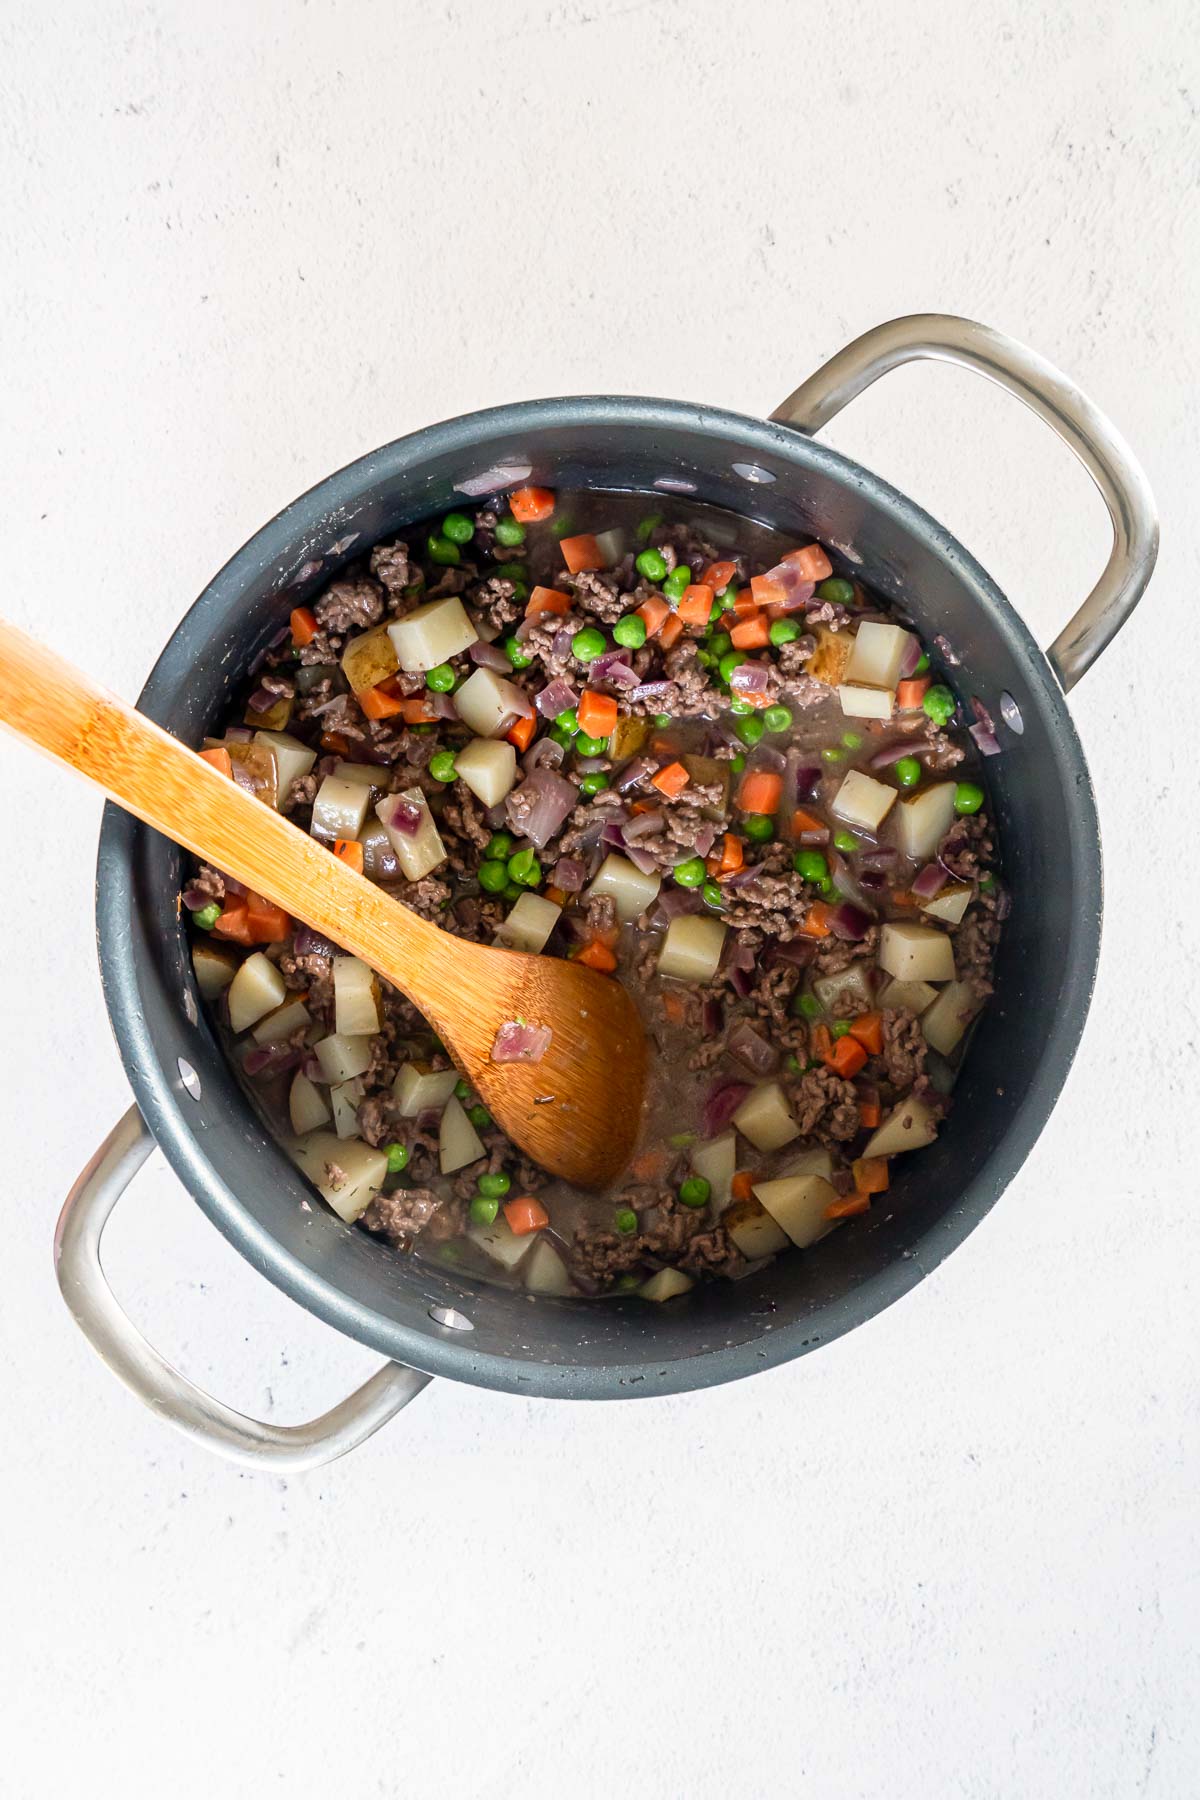 Pot full of cooked ground beef, diced potatoes, carrots, peas, and onions, being stirred by a wooden spoon.